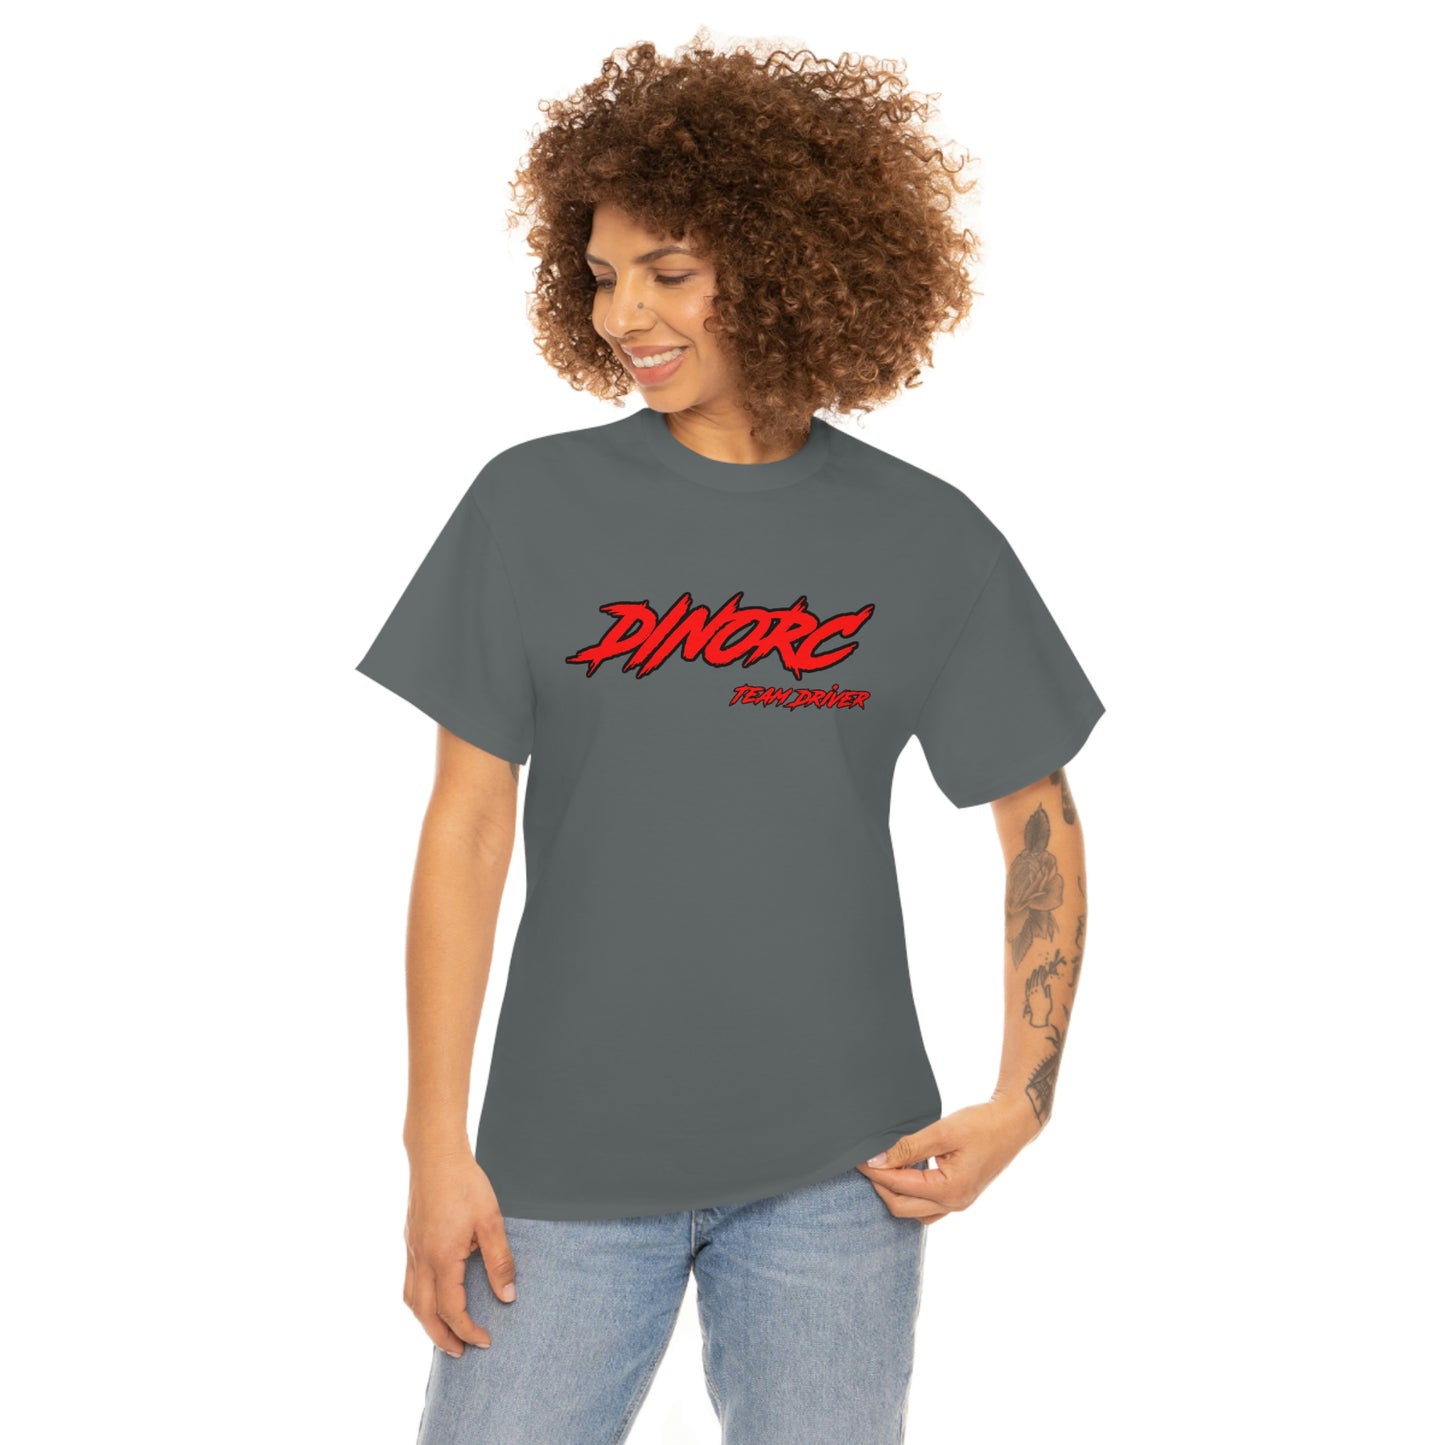 Team Driver DinoRC Logo front and back T-Shirt S-5x 5 colors